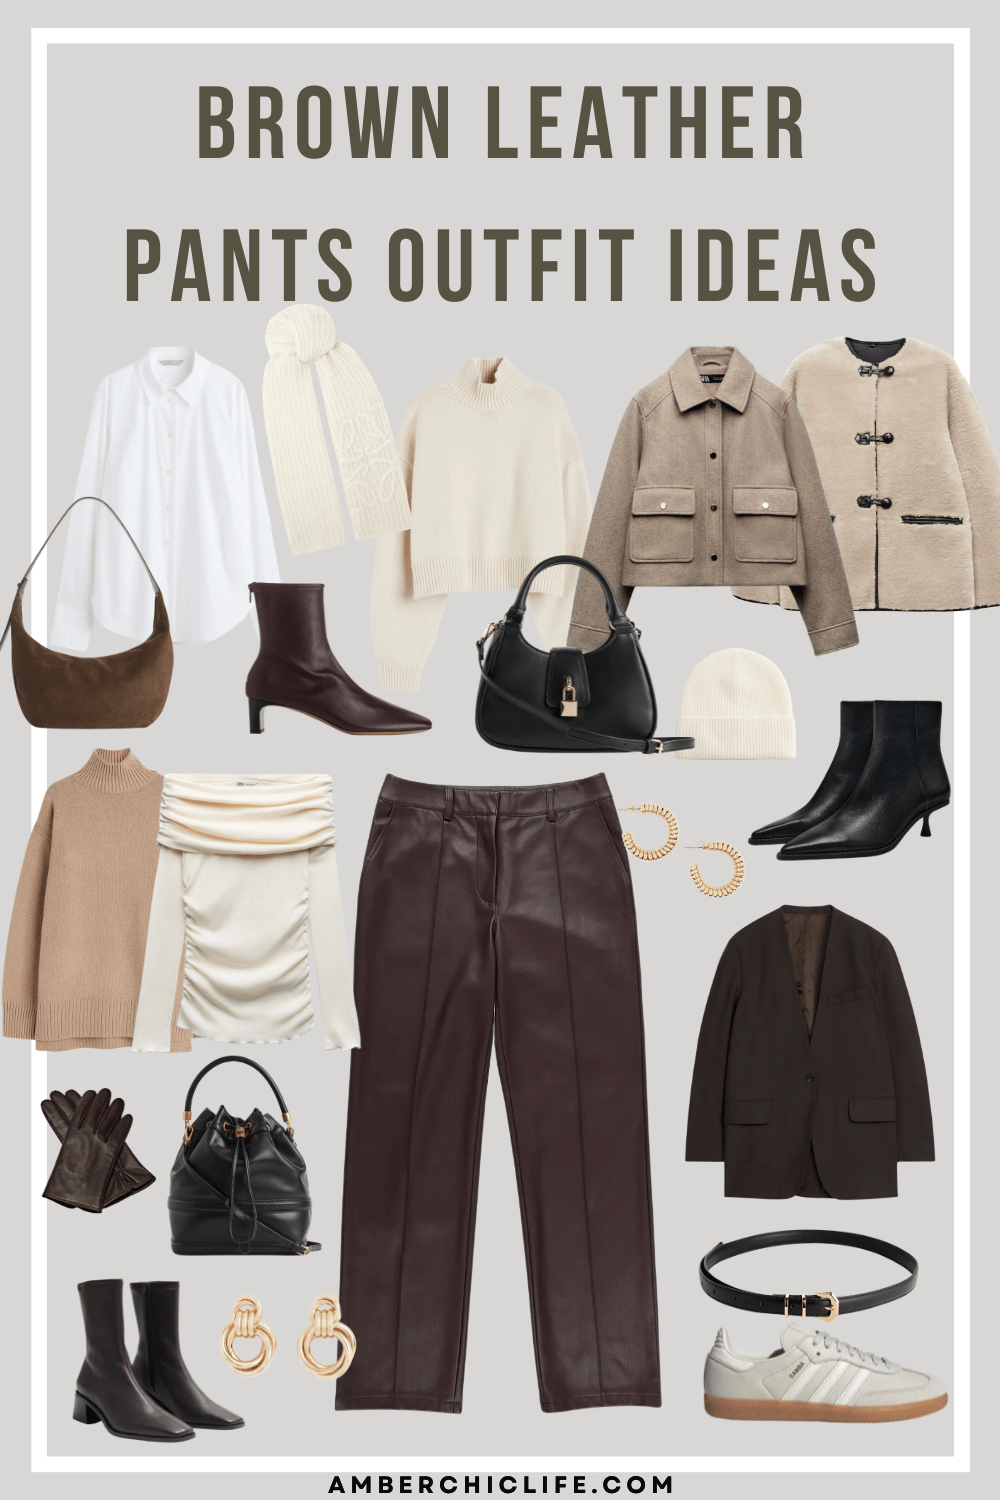 Here's What To Wear With Brown Pants In 21 Chic Outfit Ideas